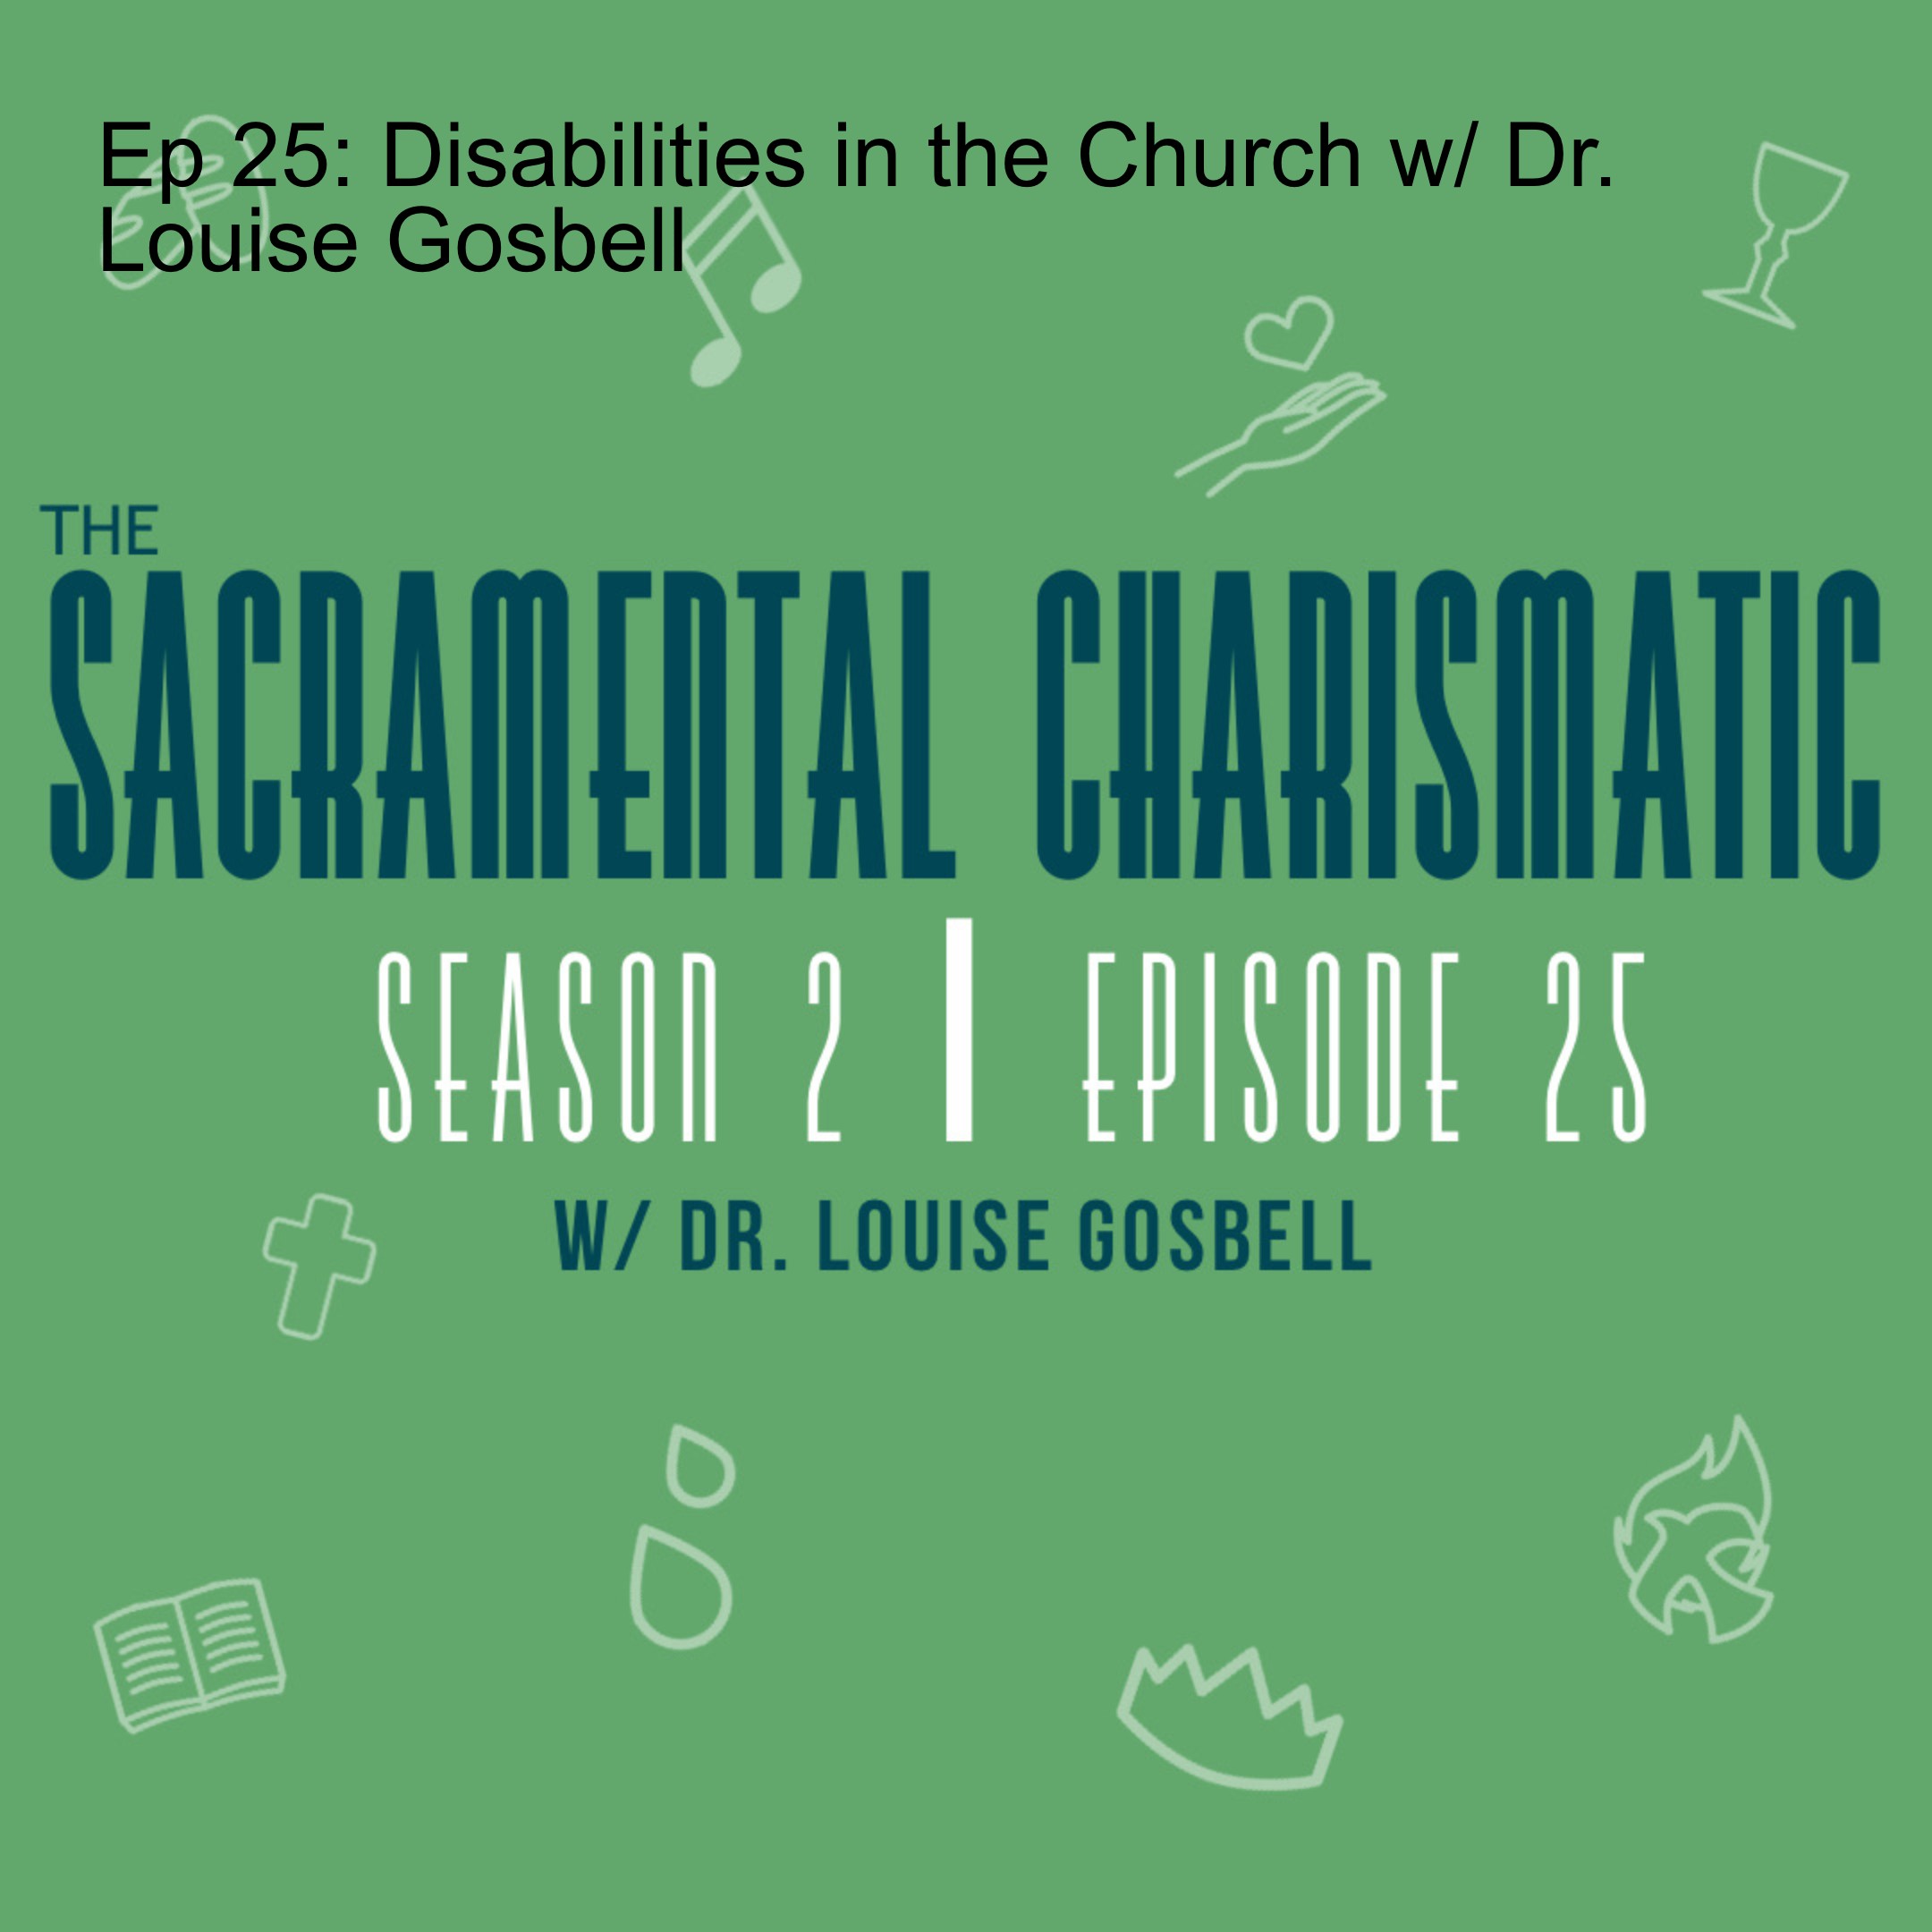 Ep 25: Disabilities in the Church w/ Dr. Louise Gosbell